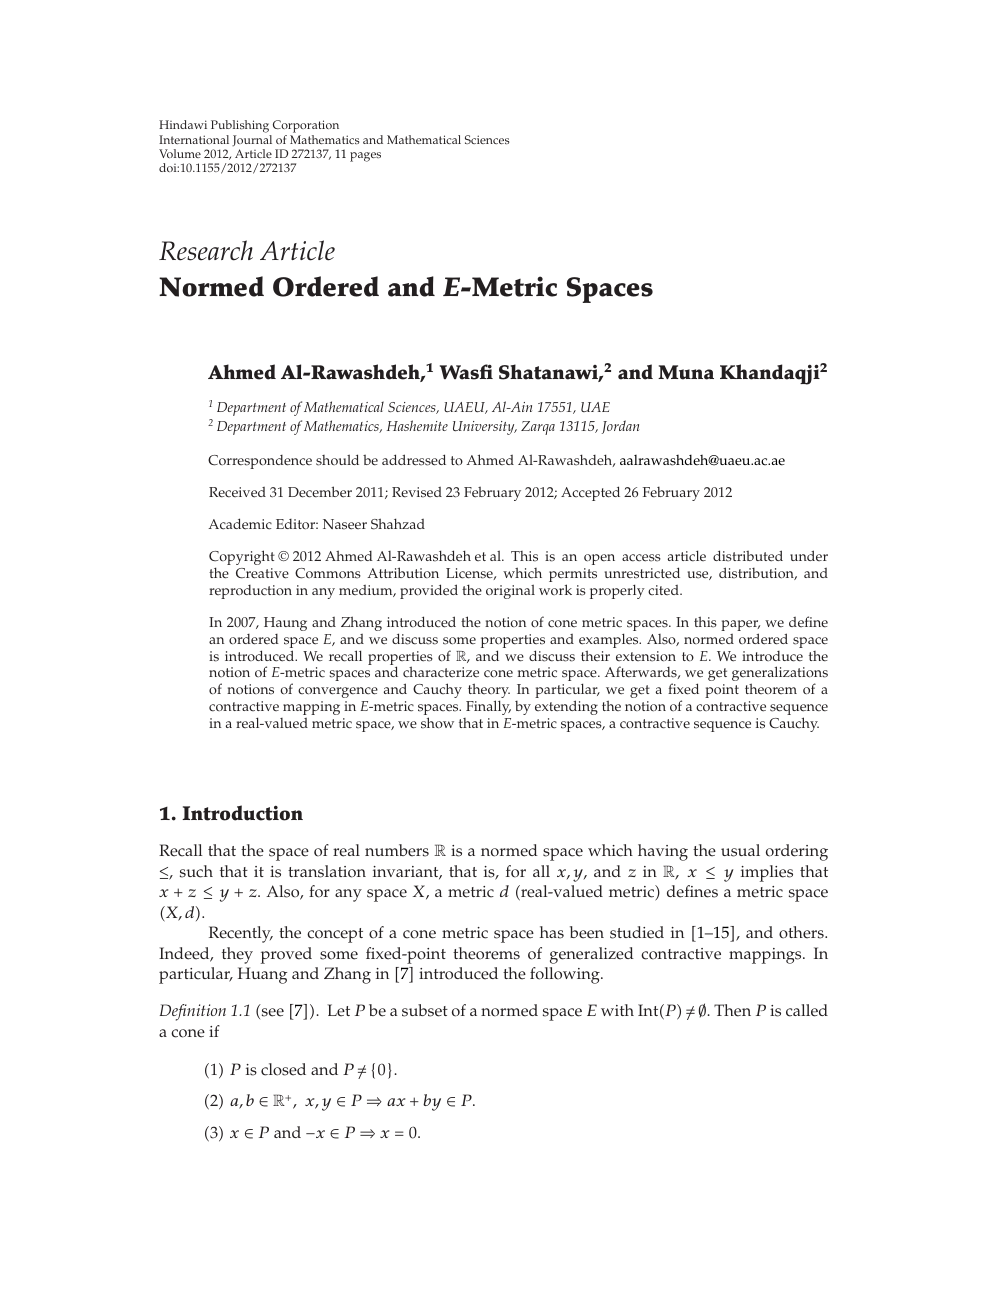 Normed Ordered And 𝐸 Metric Spaces Topic Of Research Paper In Mathematics Download Scholarly Article Pdf And Read For Free On Cyberleninka Open Science Hub